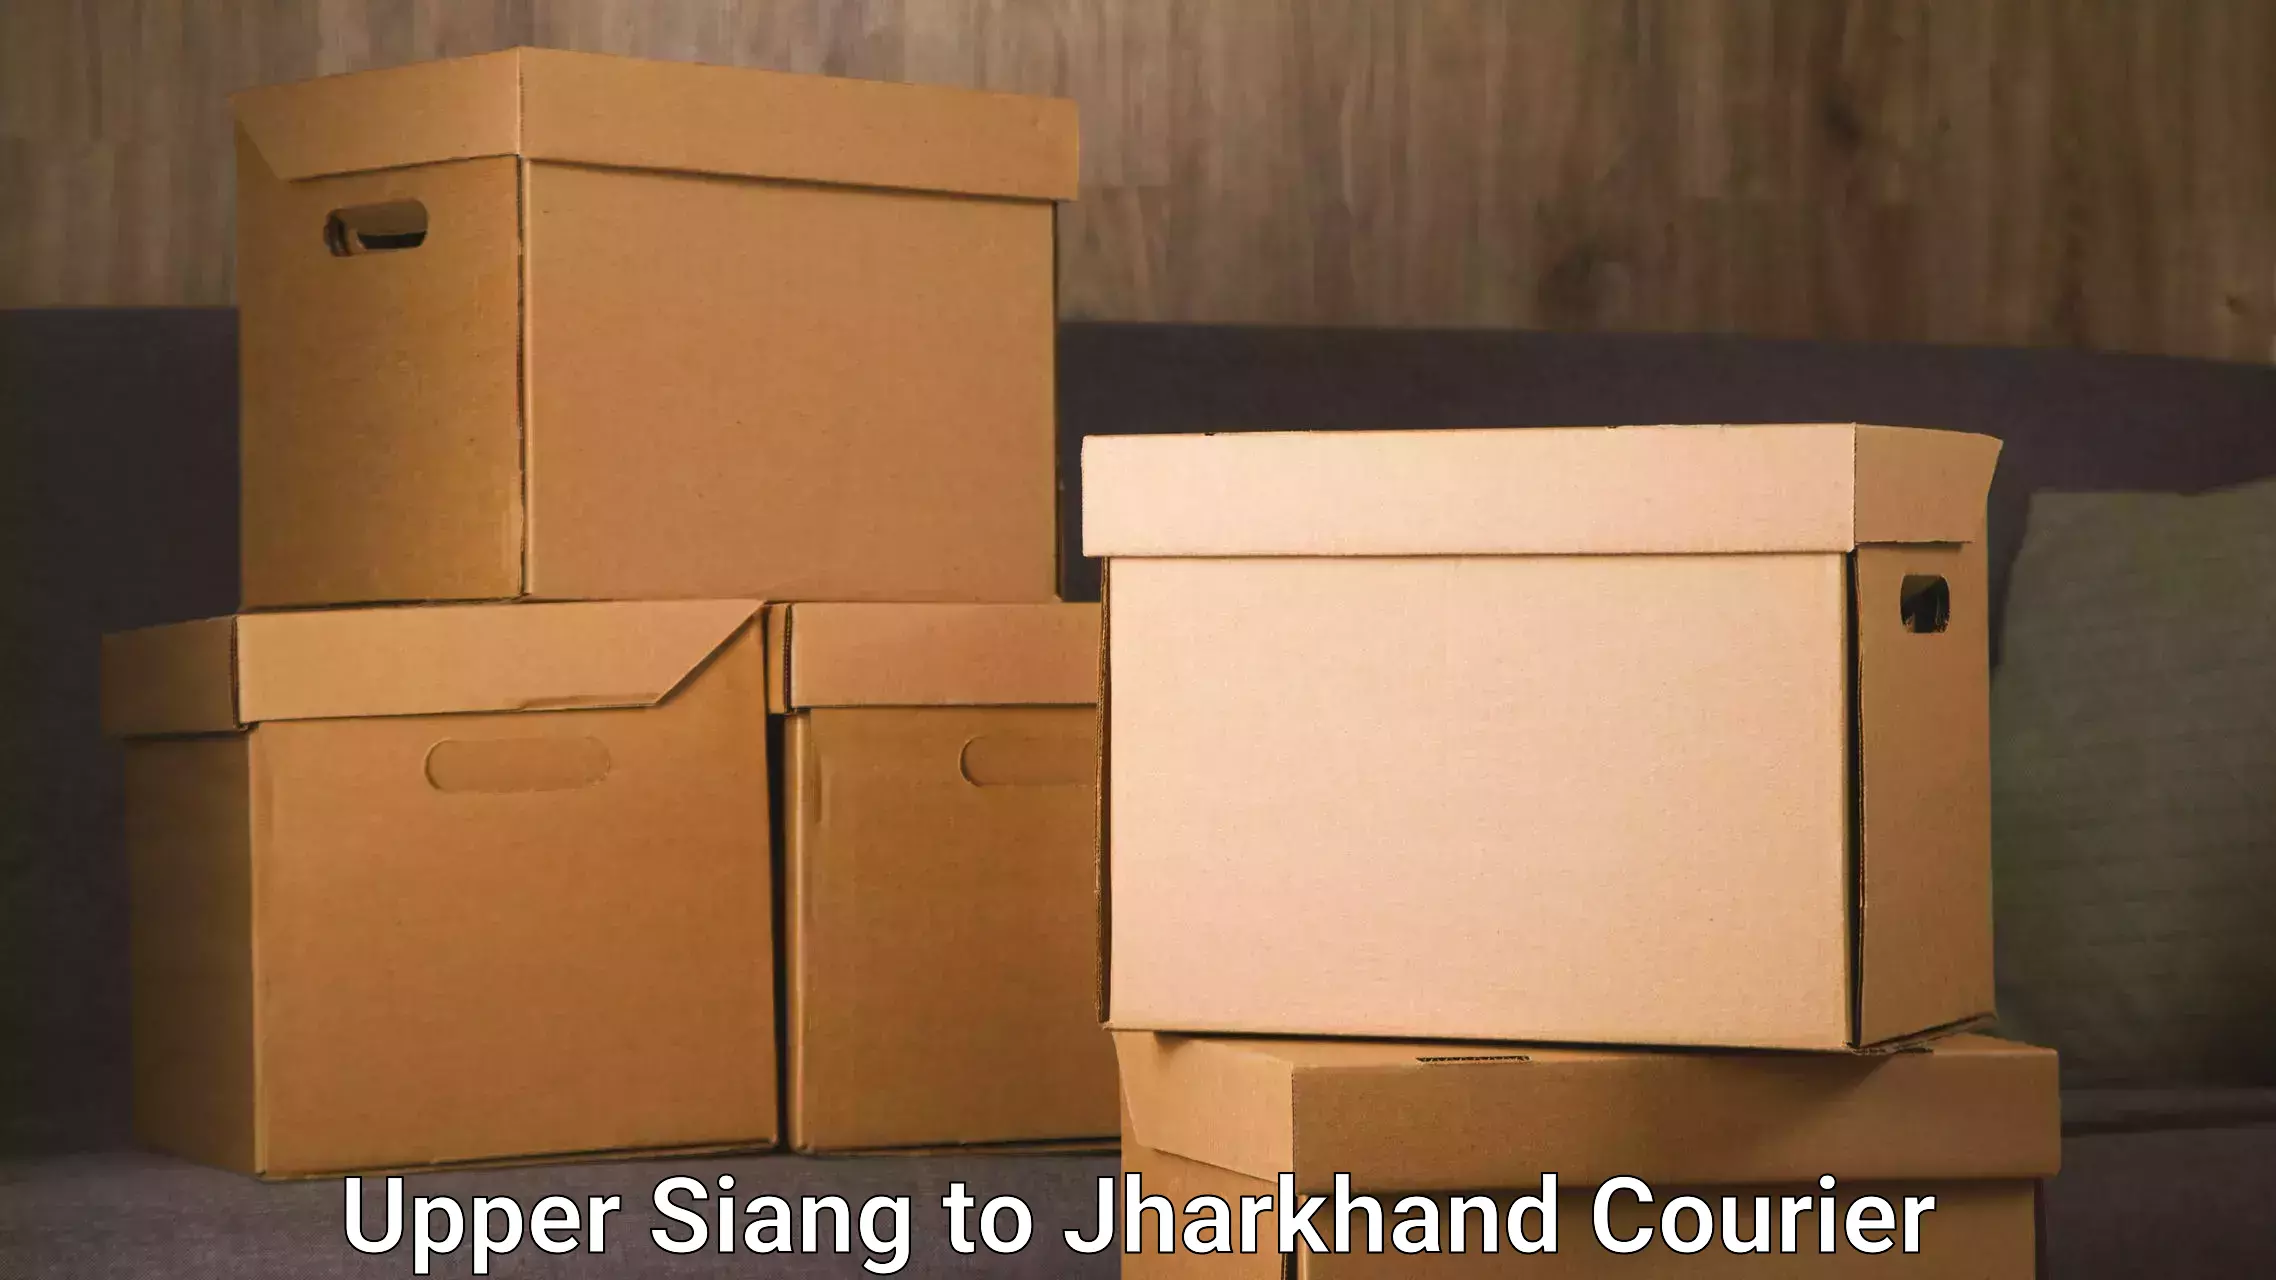 Courier insurance in Upper Siang to Rajmahal